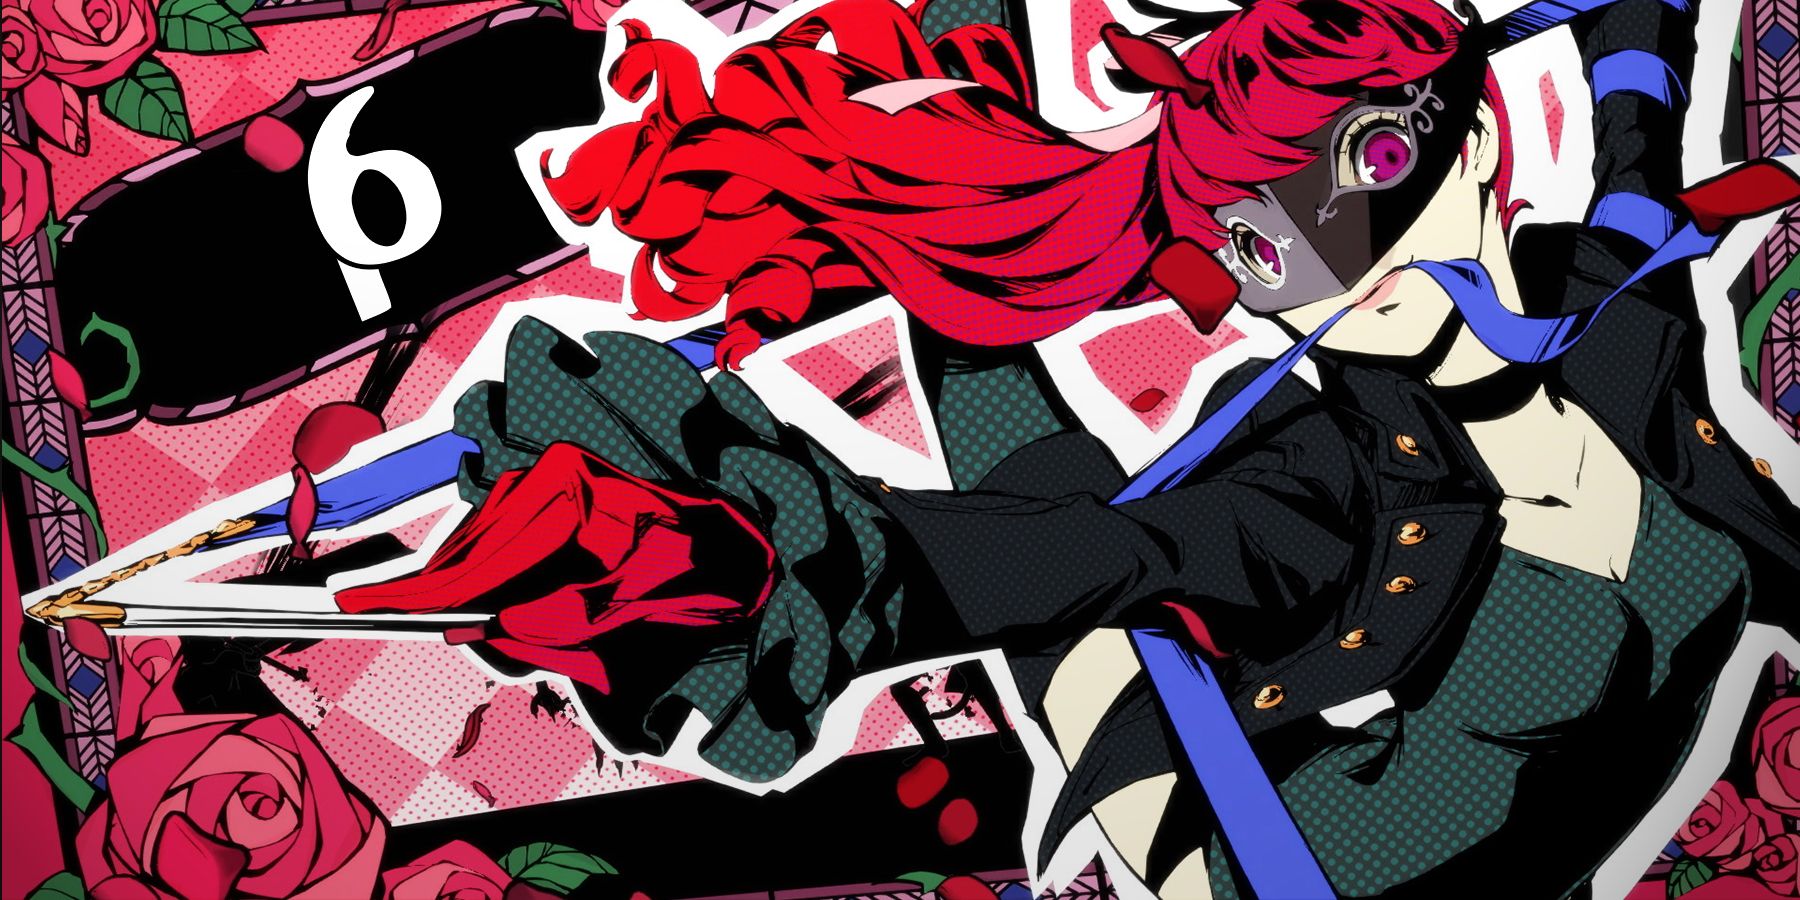 Persona 6 rumor suggests PS5 exclusivity and 2024 release date